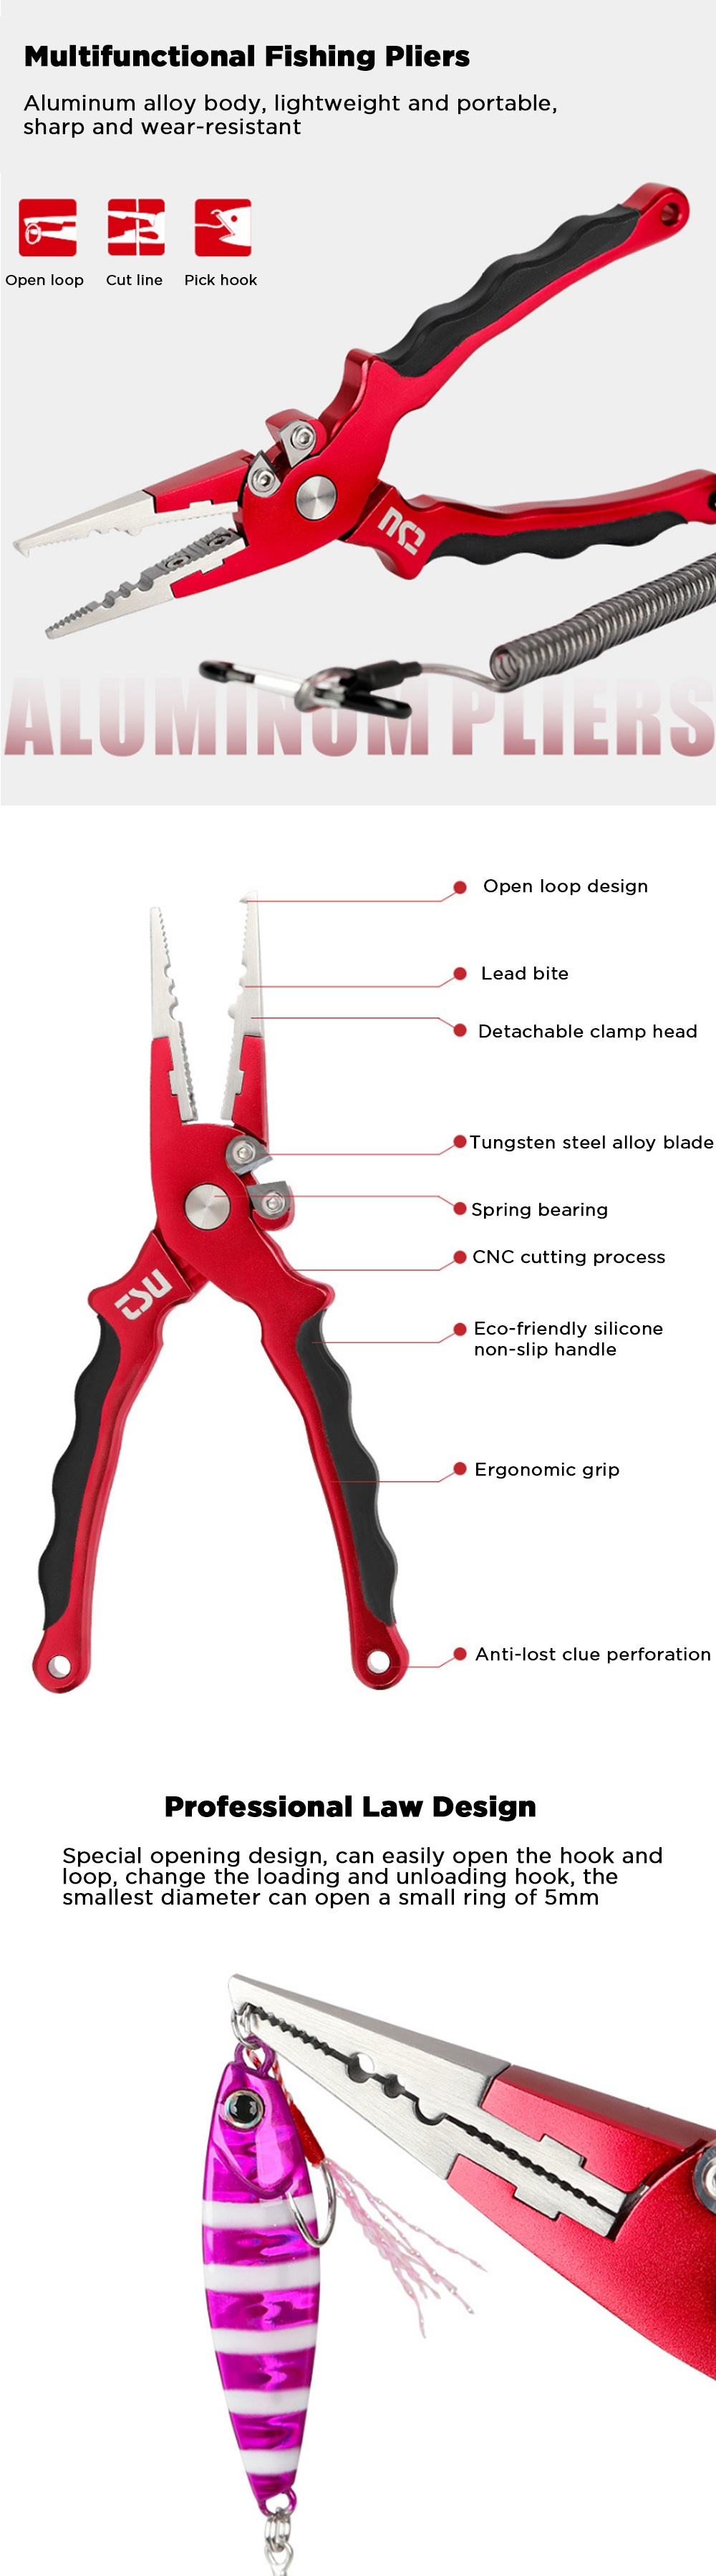 ZANLURE-2cm-Fishing-Pliers-Aluminum-Alloy-Fishing-Tools-Braid-Cutters-Split-Ring-Pliers-Hook-Remover-1727860-1